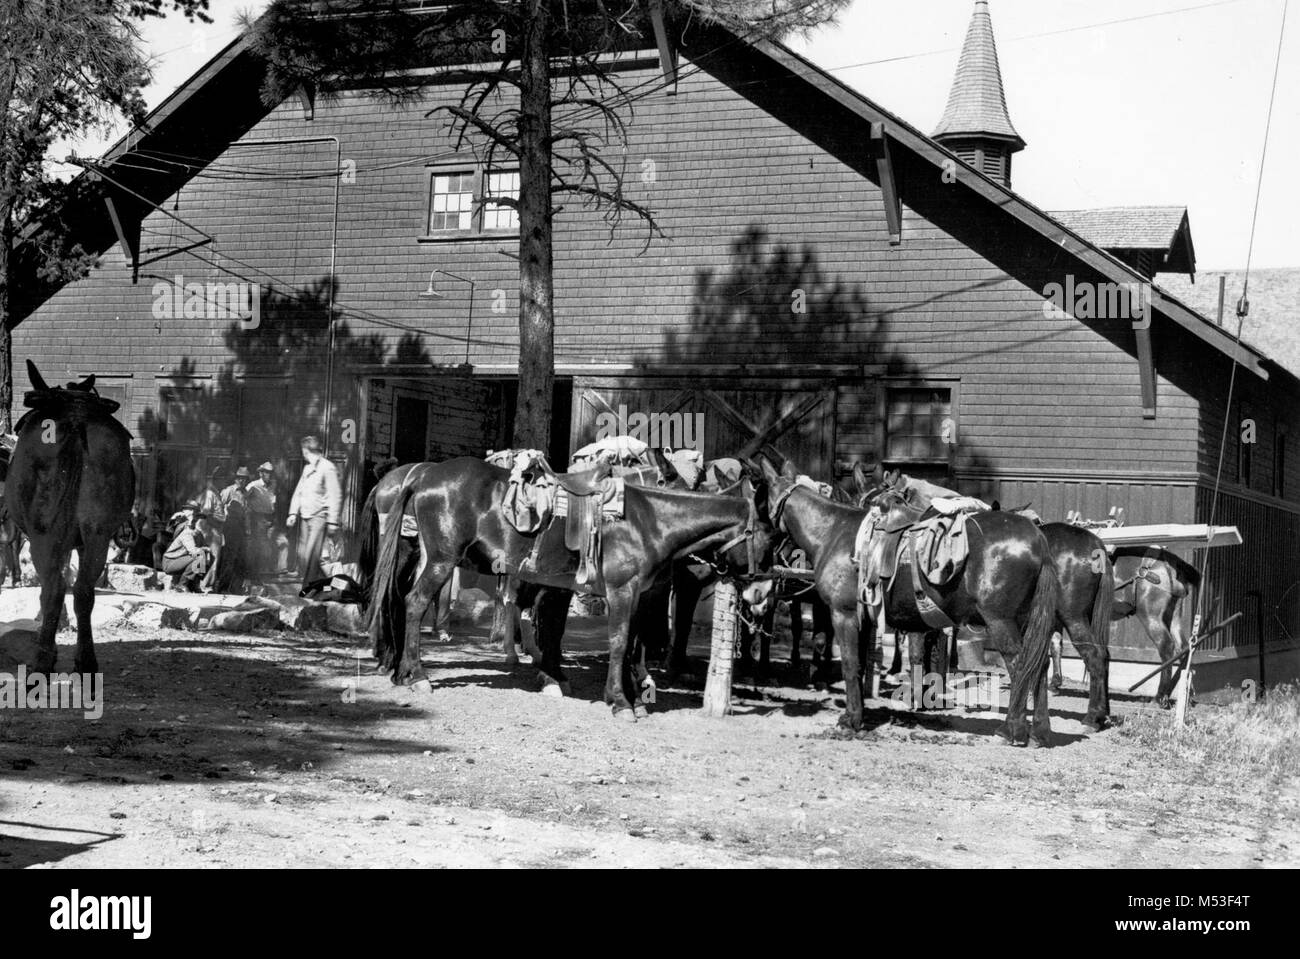 Grand Canyon National Park Livery Stable (1944)  . MULE PACK TRAIN READY TO START RESCUE OF ARMY FLIERS WHO HAD PARACHUTED INTO THE CANYON. FRED HARVEY LIVERY BARN. 27 JUNE 1944. NPS, BRYANT.  The Livery Stable was built in 1906 along with the Mule Barn and the Blacksmith/Saddle Shop to serve the El Tovar Hotel. Collectively known as El Tovar Stables, these three buildings were designed by staff of the Fred Harvey Company in the Craftsman style.   The Livery Stable was built to house carriages and horses used to give visitors tours of the South Rim. These tours were eventually discontinued fol Stock Photo